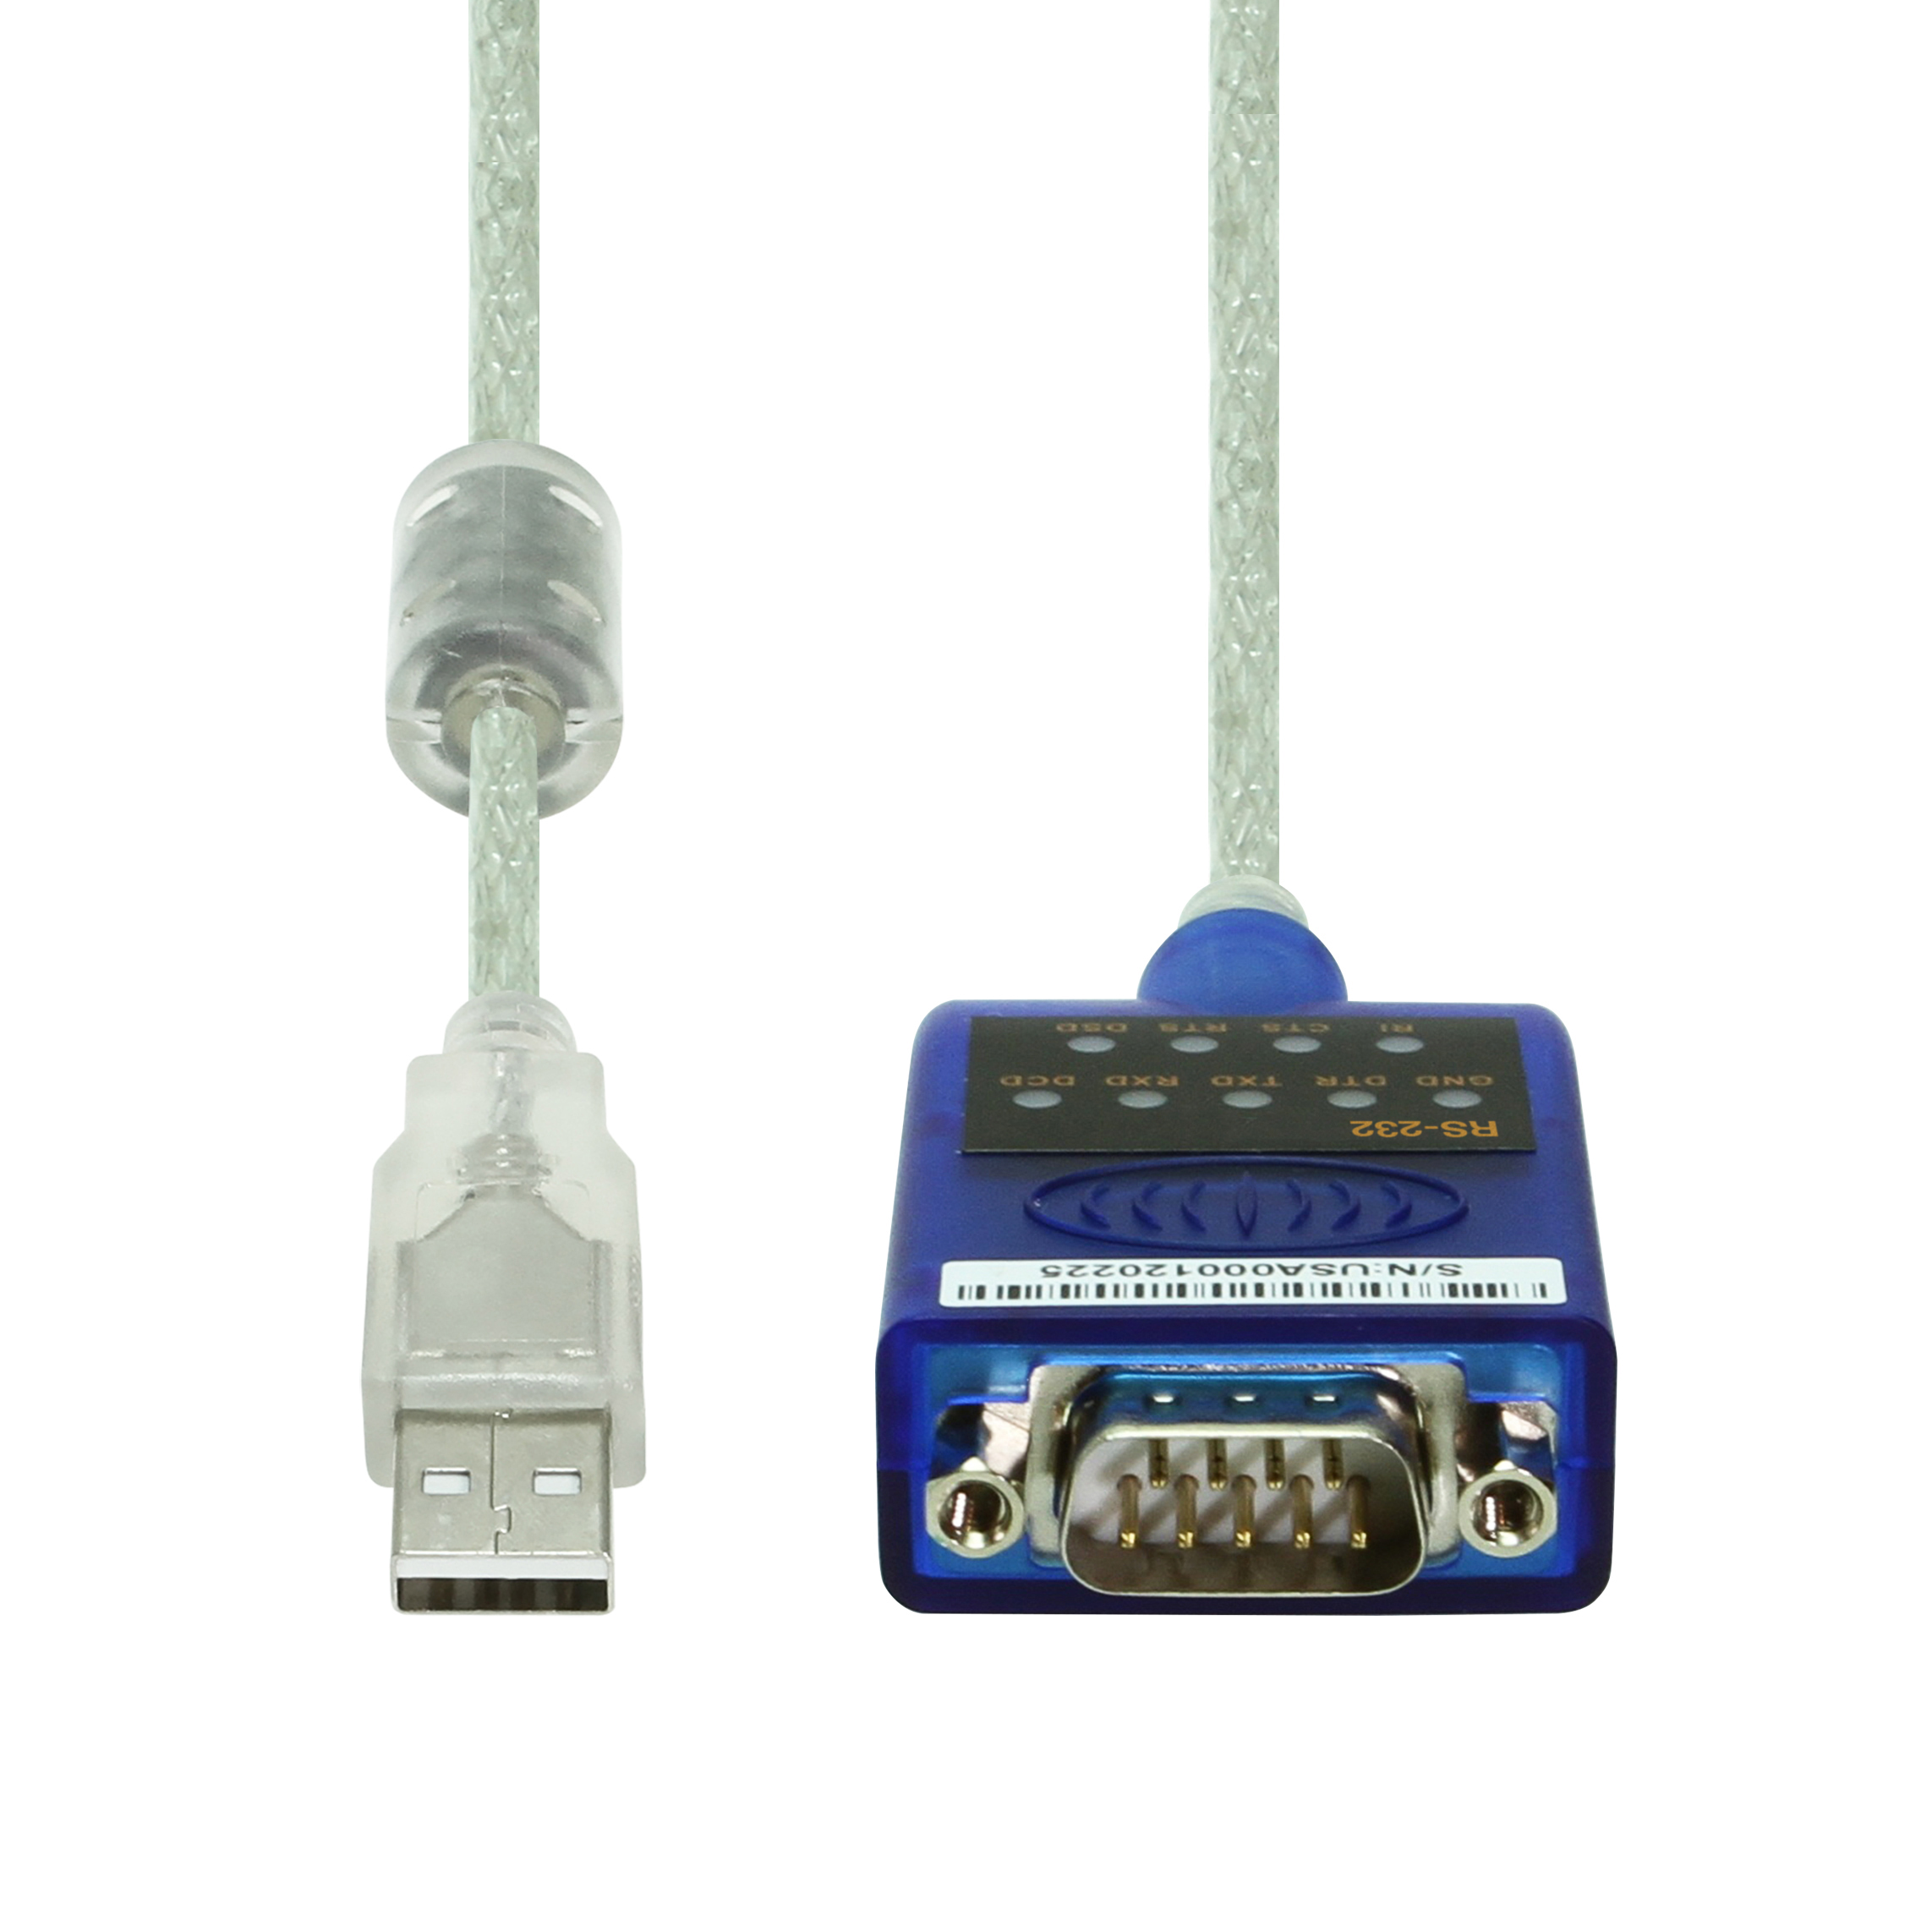 USB 2.0 RS-232 Serial Adapter with LED Indicators